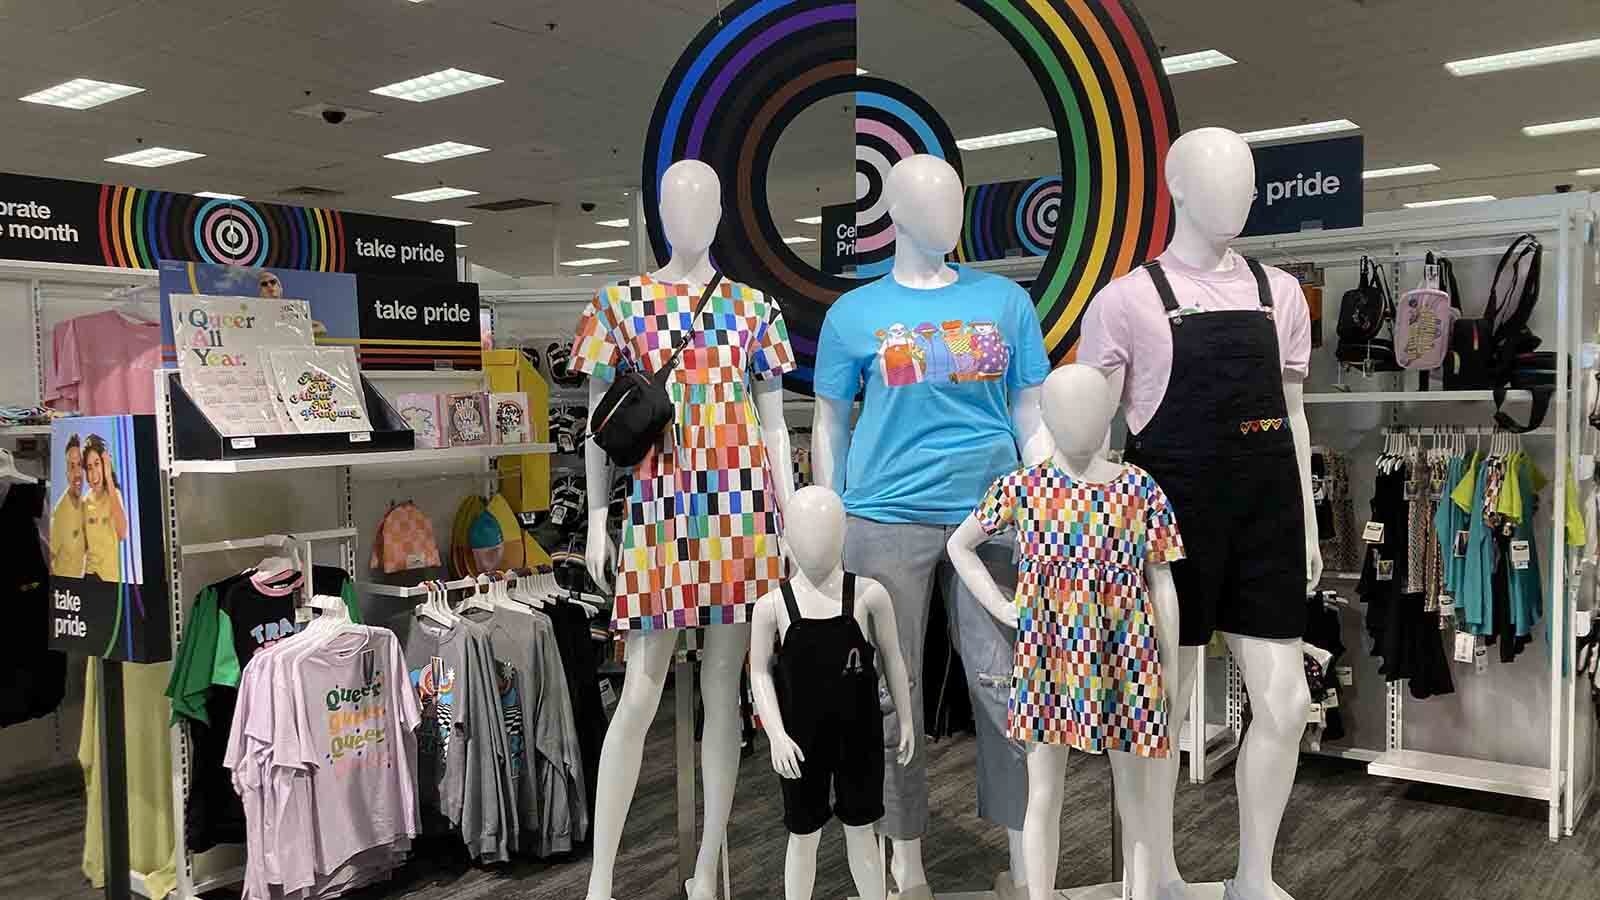 Pride Shirts - Queer Tops - Seven Even Clothing